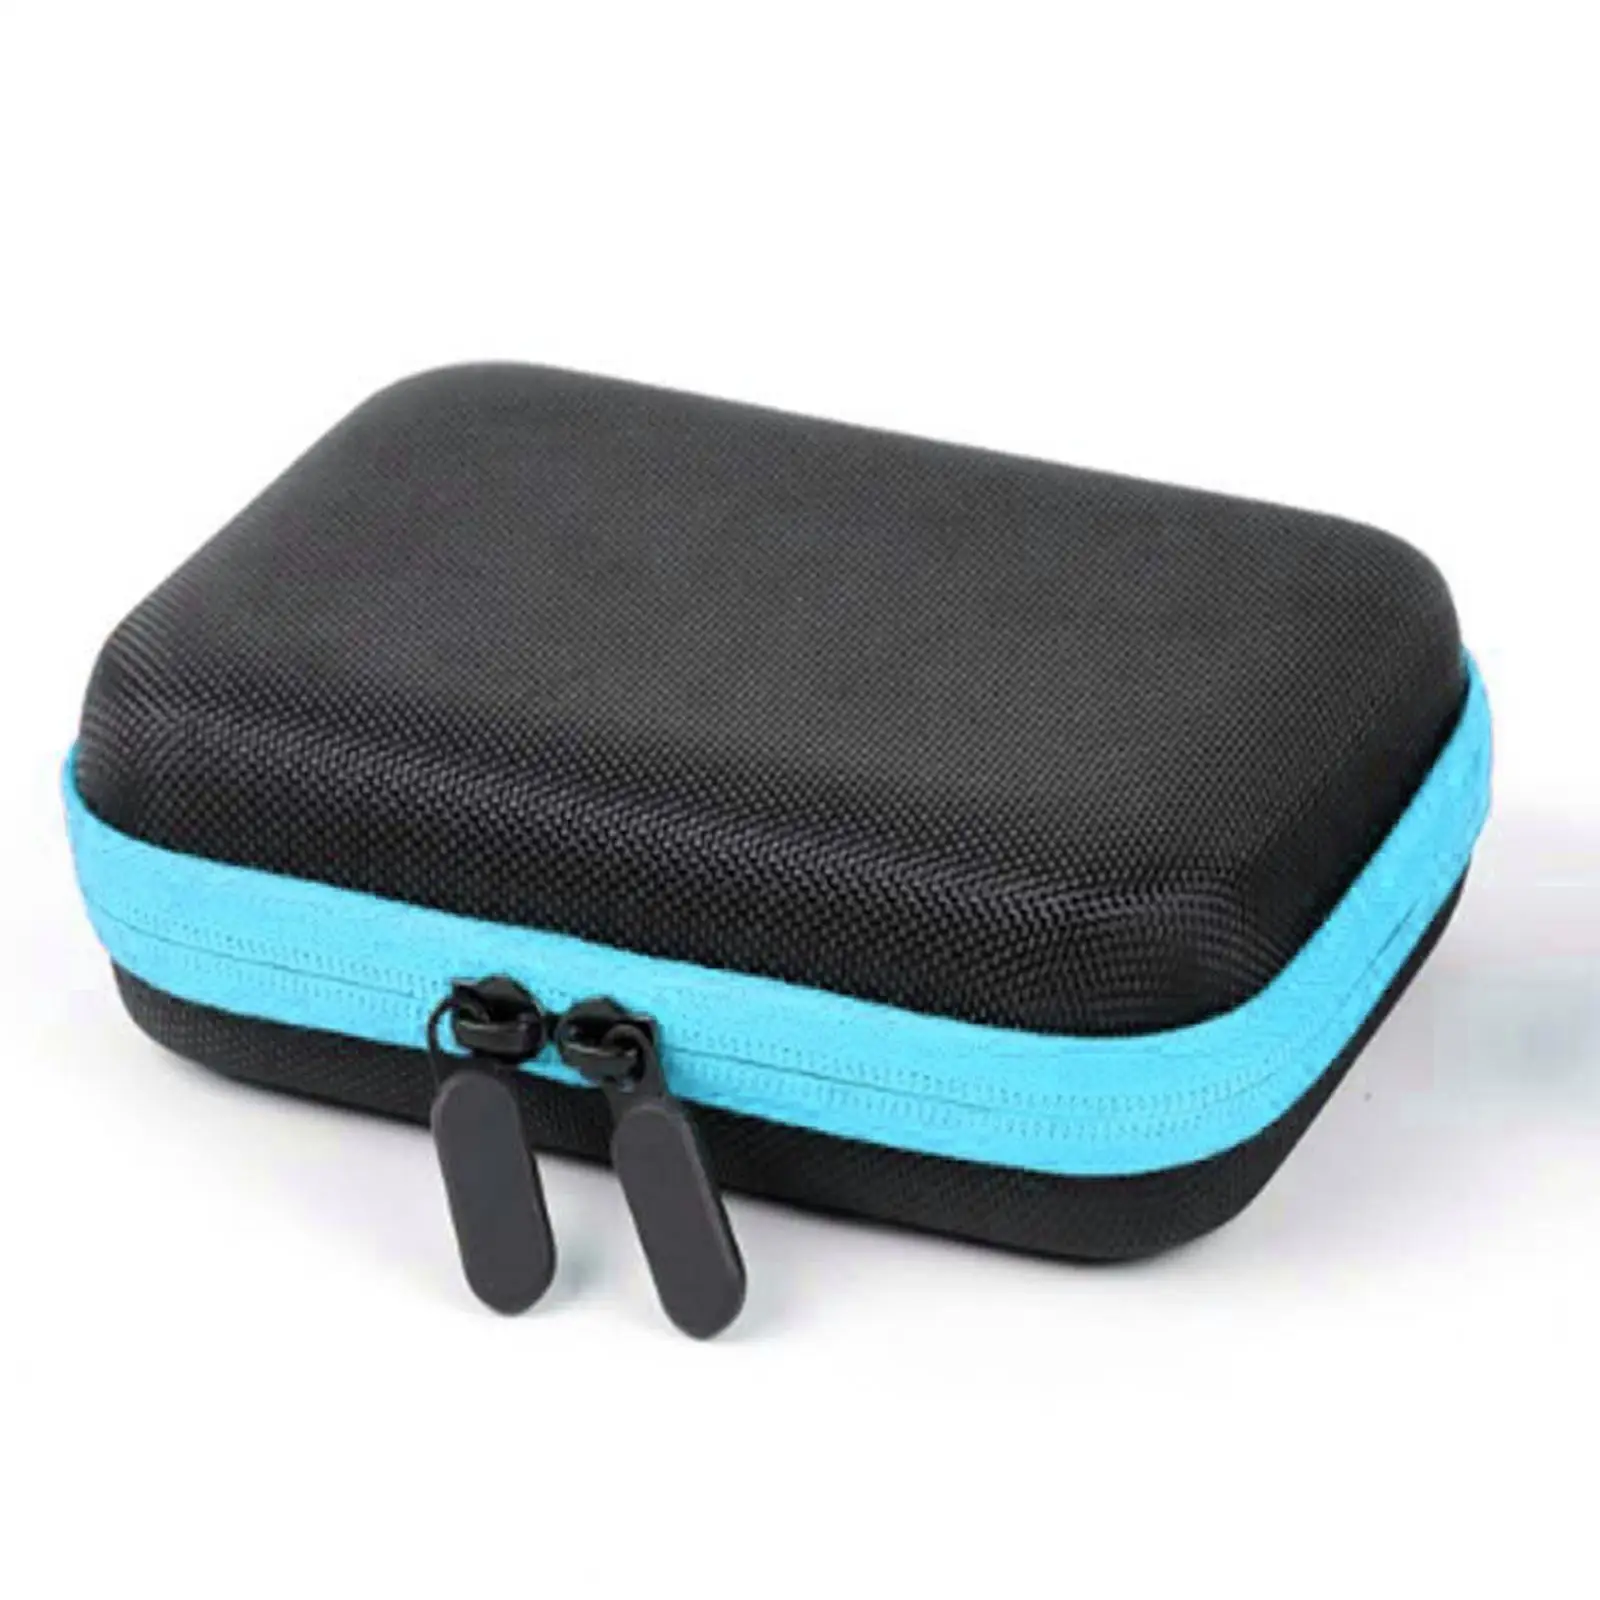 12 Bottle Essential Oil Carry Case 10ML Holder Storage Aromatherapy Hand Bag portable Traveling Carrying Case Holder Organize